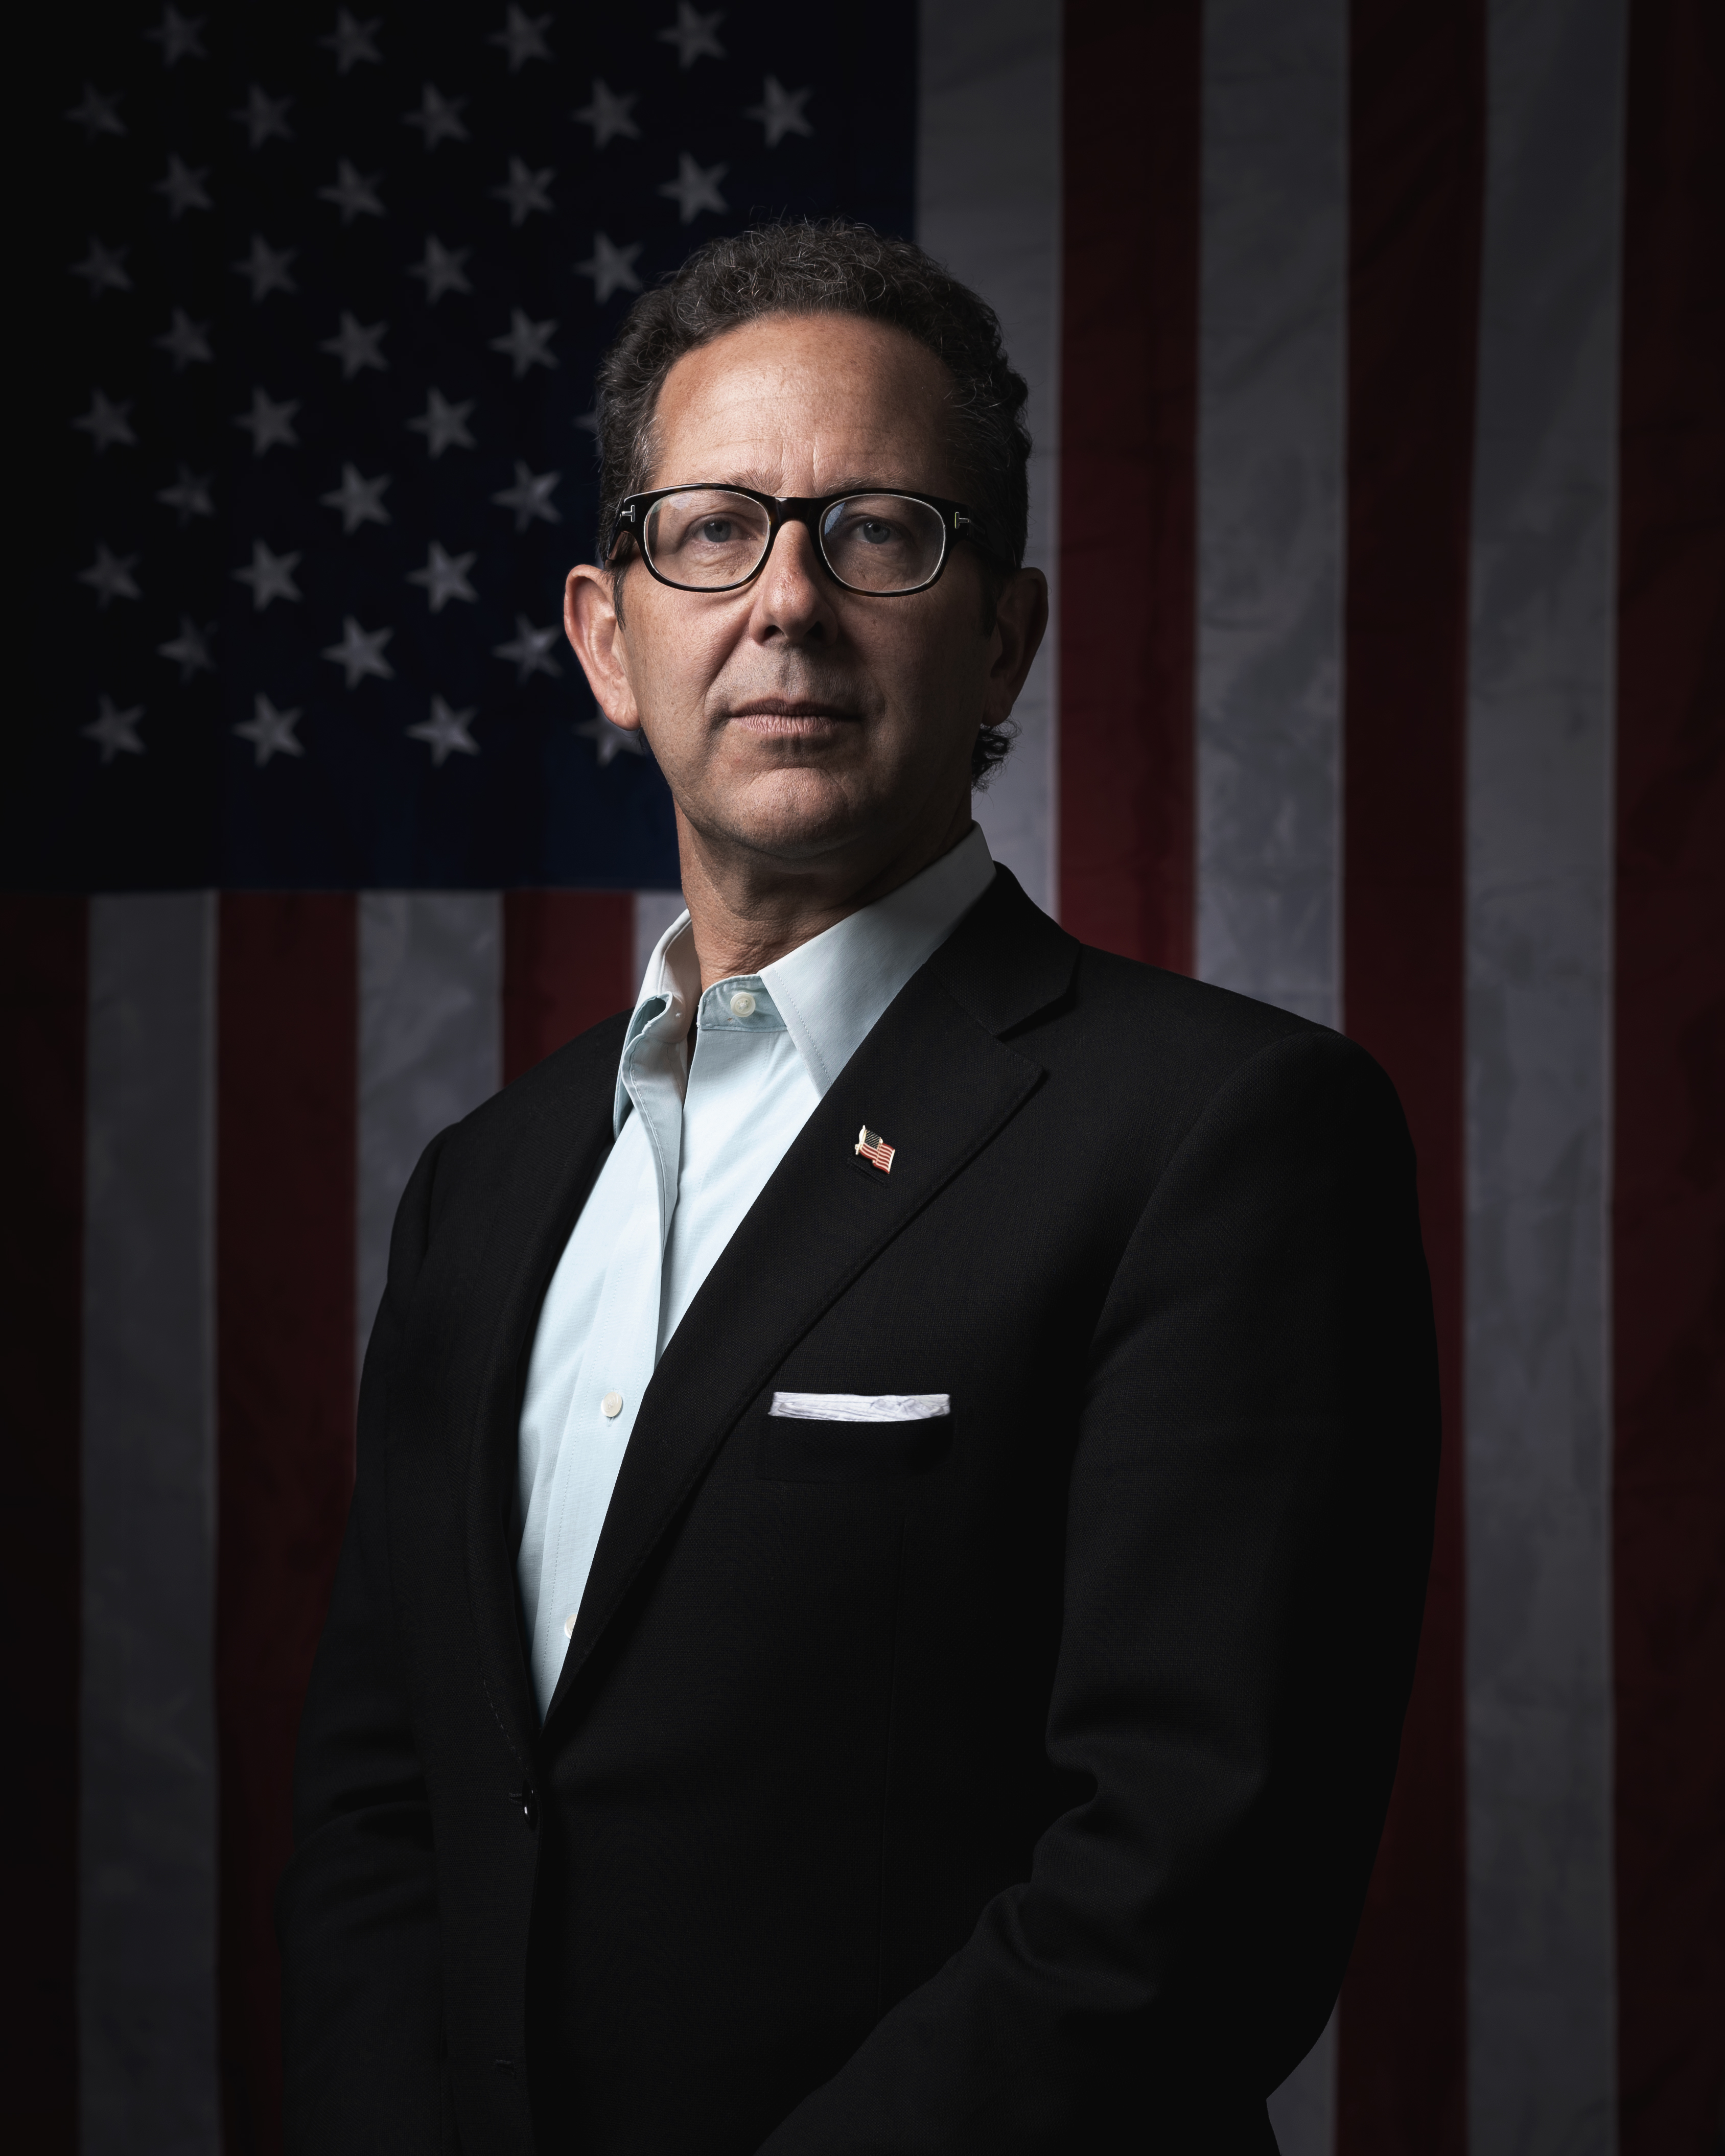 andrew-young-photography-moody-portraits-men-chicago-headshots-illinois-st.-charles-saint-charles-american-flag-dark-illinois-portrait-photographer-editorial-la-los-angeles-california-wisconsin-midwest-new-york-marketing